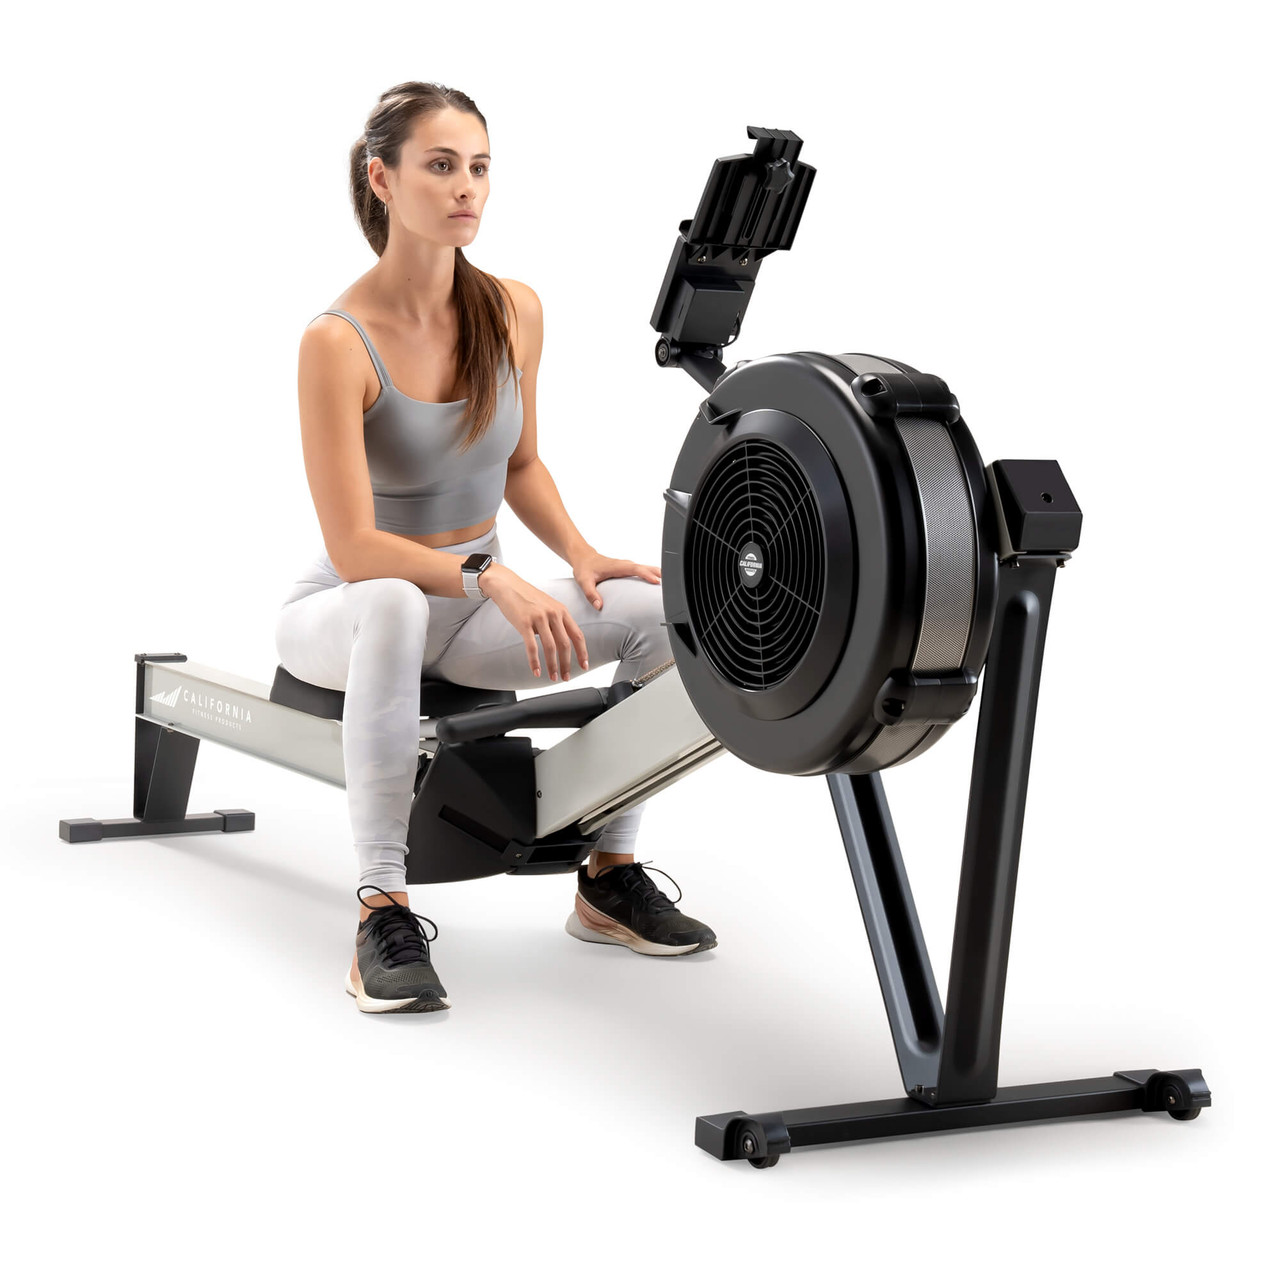 https://cdn11.bigcommerce.com/s-r2fl439k1s/images/stencil/1280x1280/products/566/4419/Deluxe_Rowing_Machine_with_Adjustable_Air_Resistance_-_NS-7874RW_California_Fitness_Products_-_with_Model__23303.1702407658.jpg?c=2